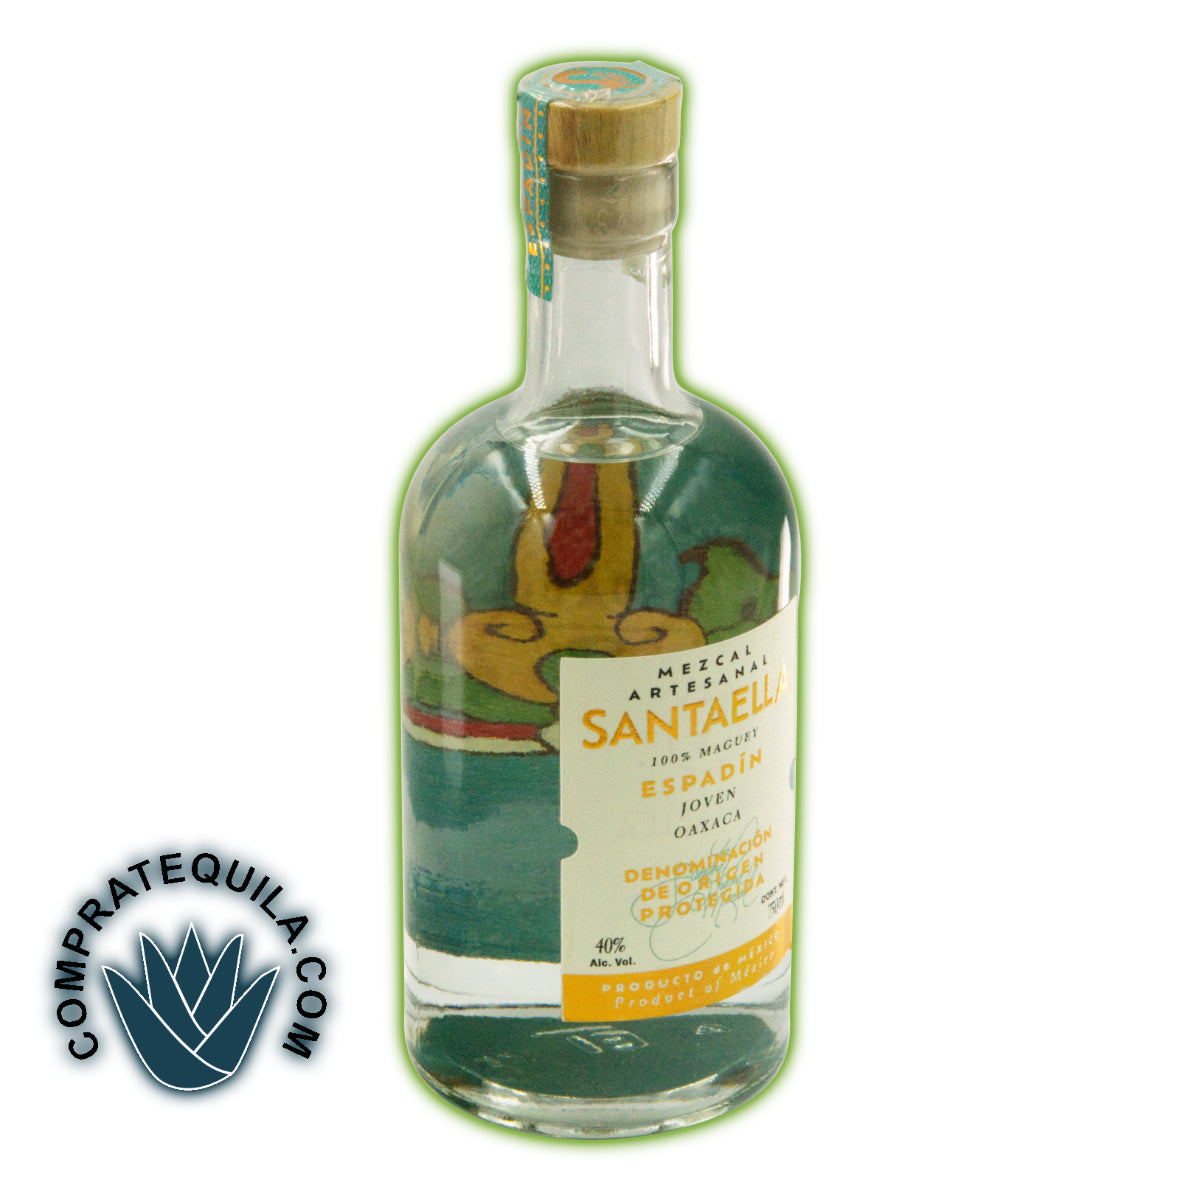 Mezcal Santaella: Discover the Artisanal Excellence of Oaxaca in Every Drop